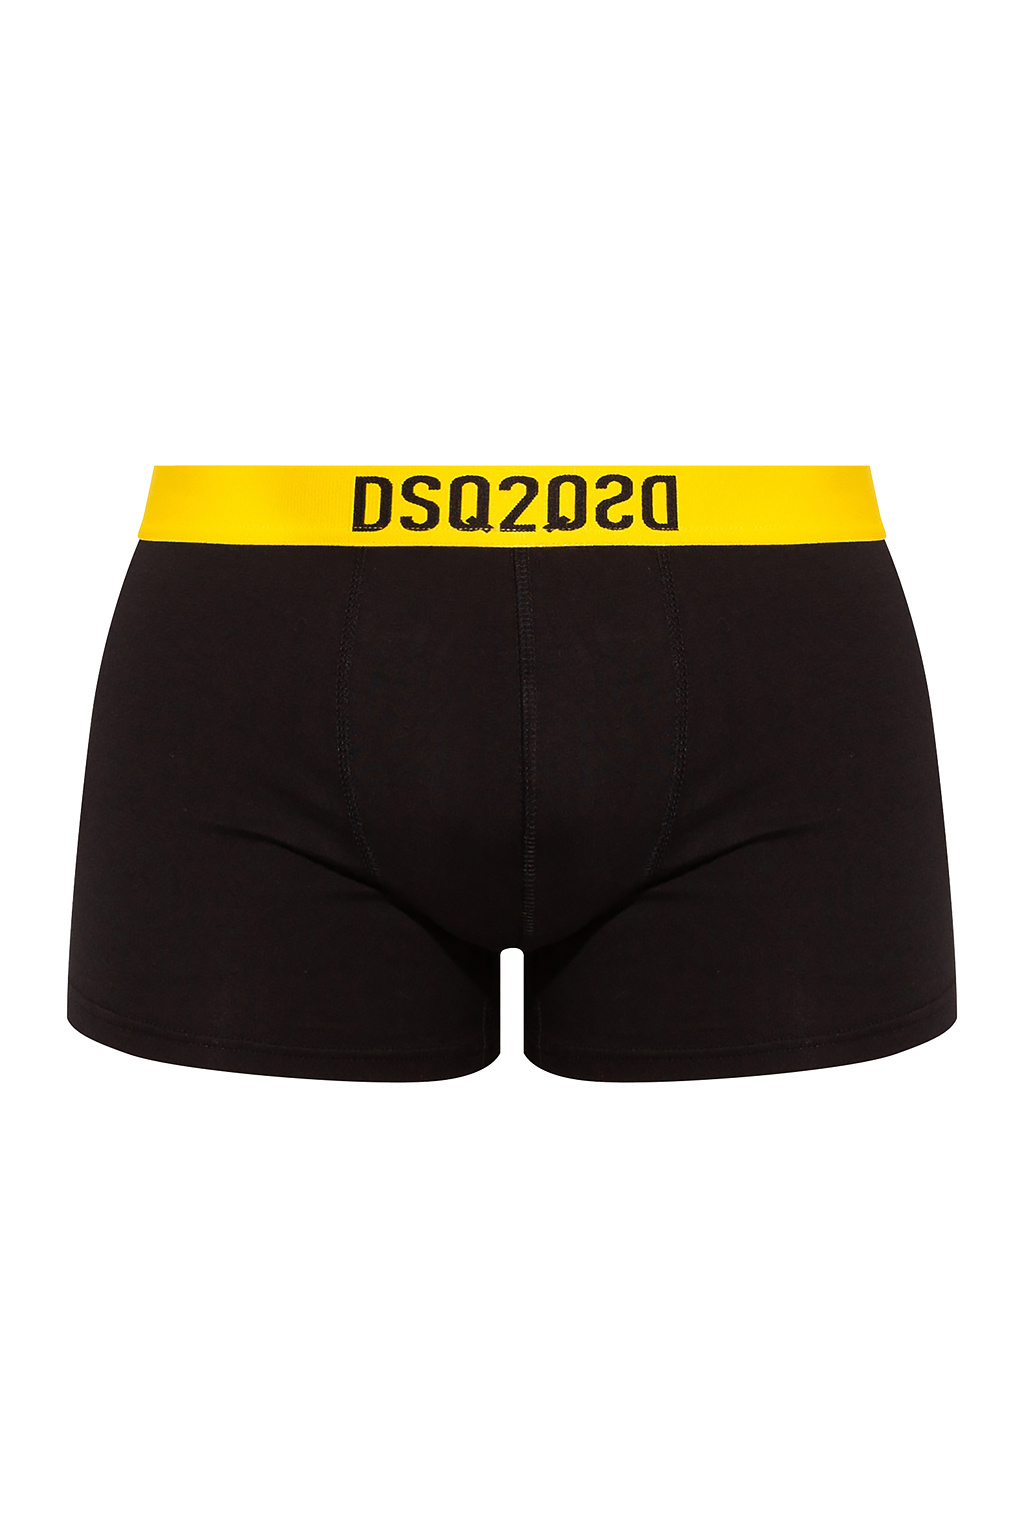 Dsquared2 Boxers with logo